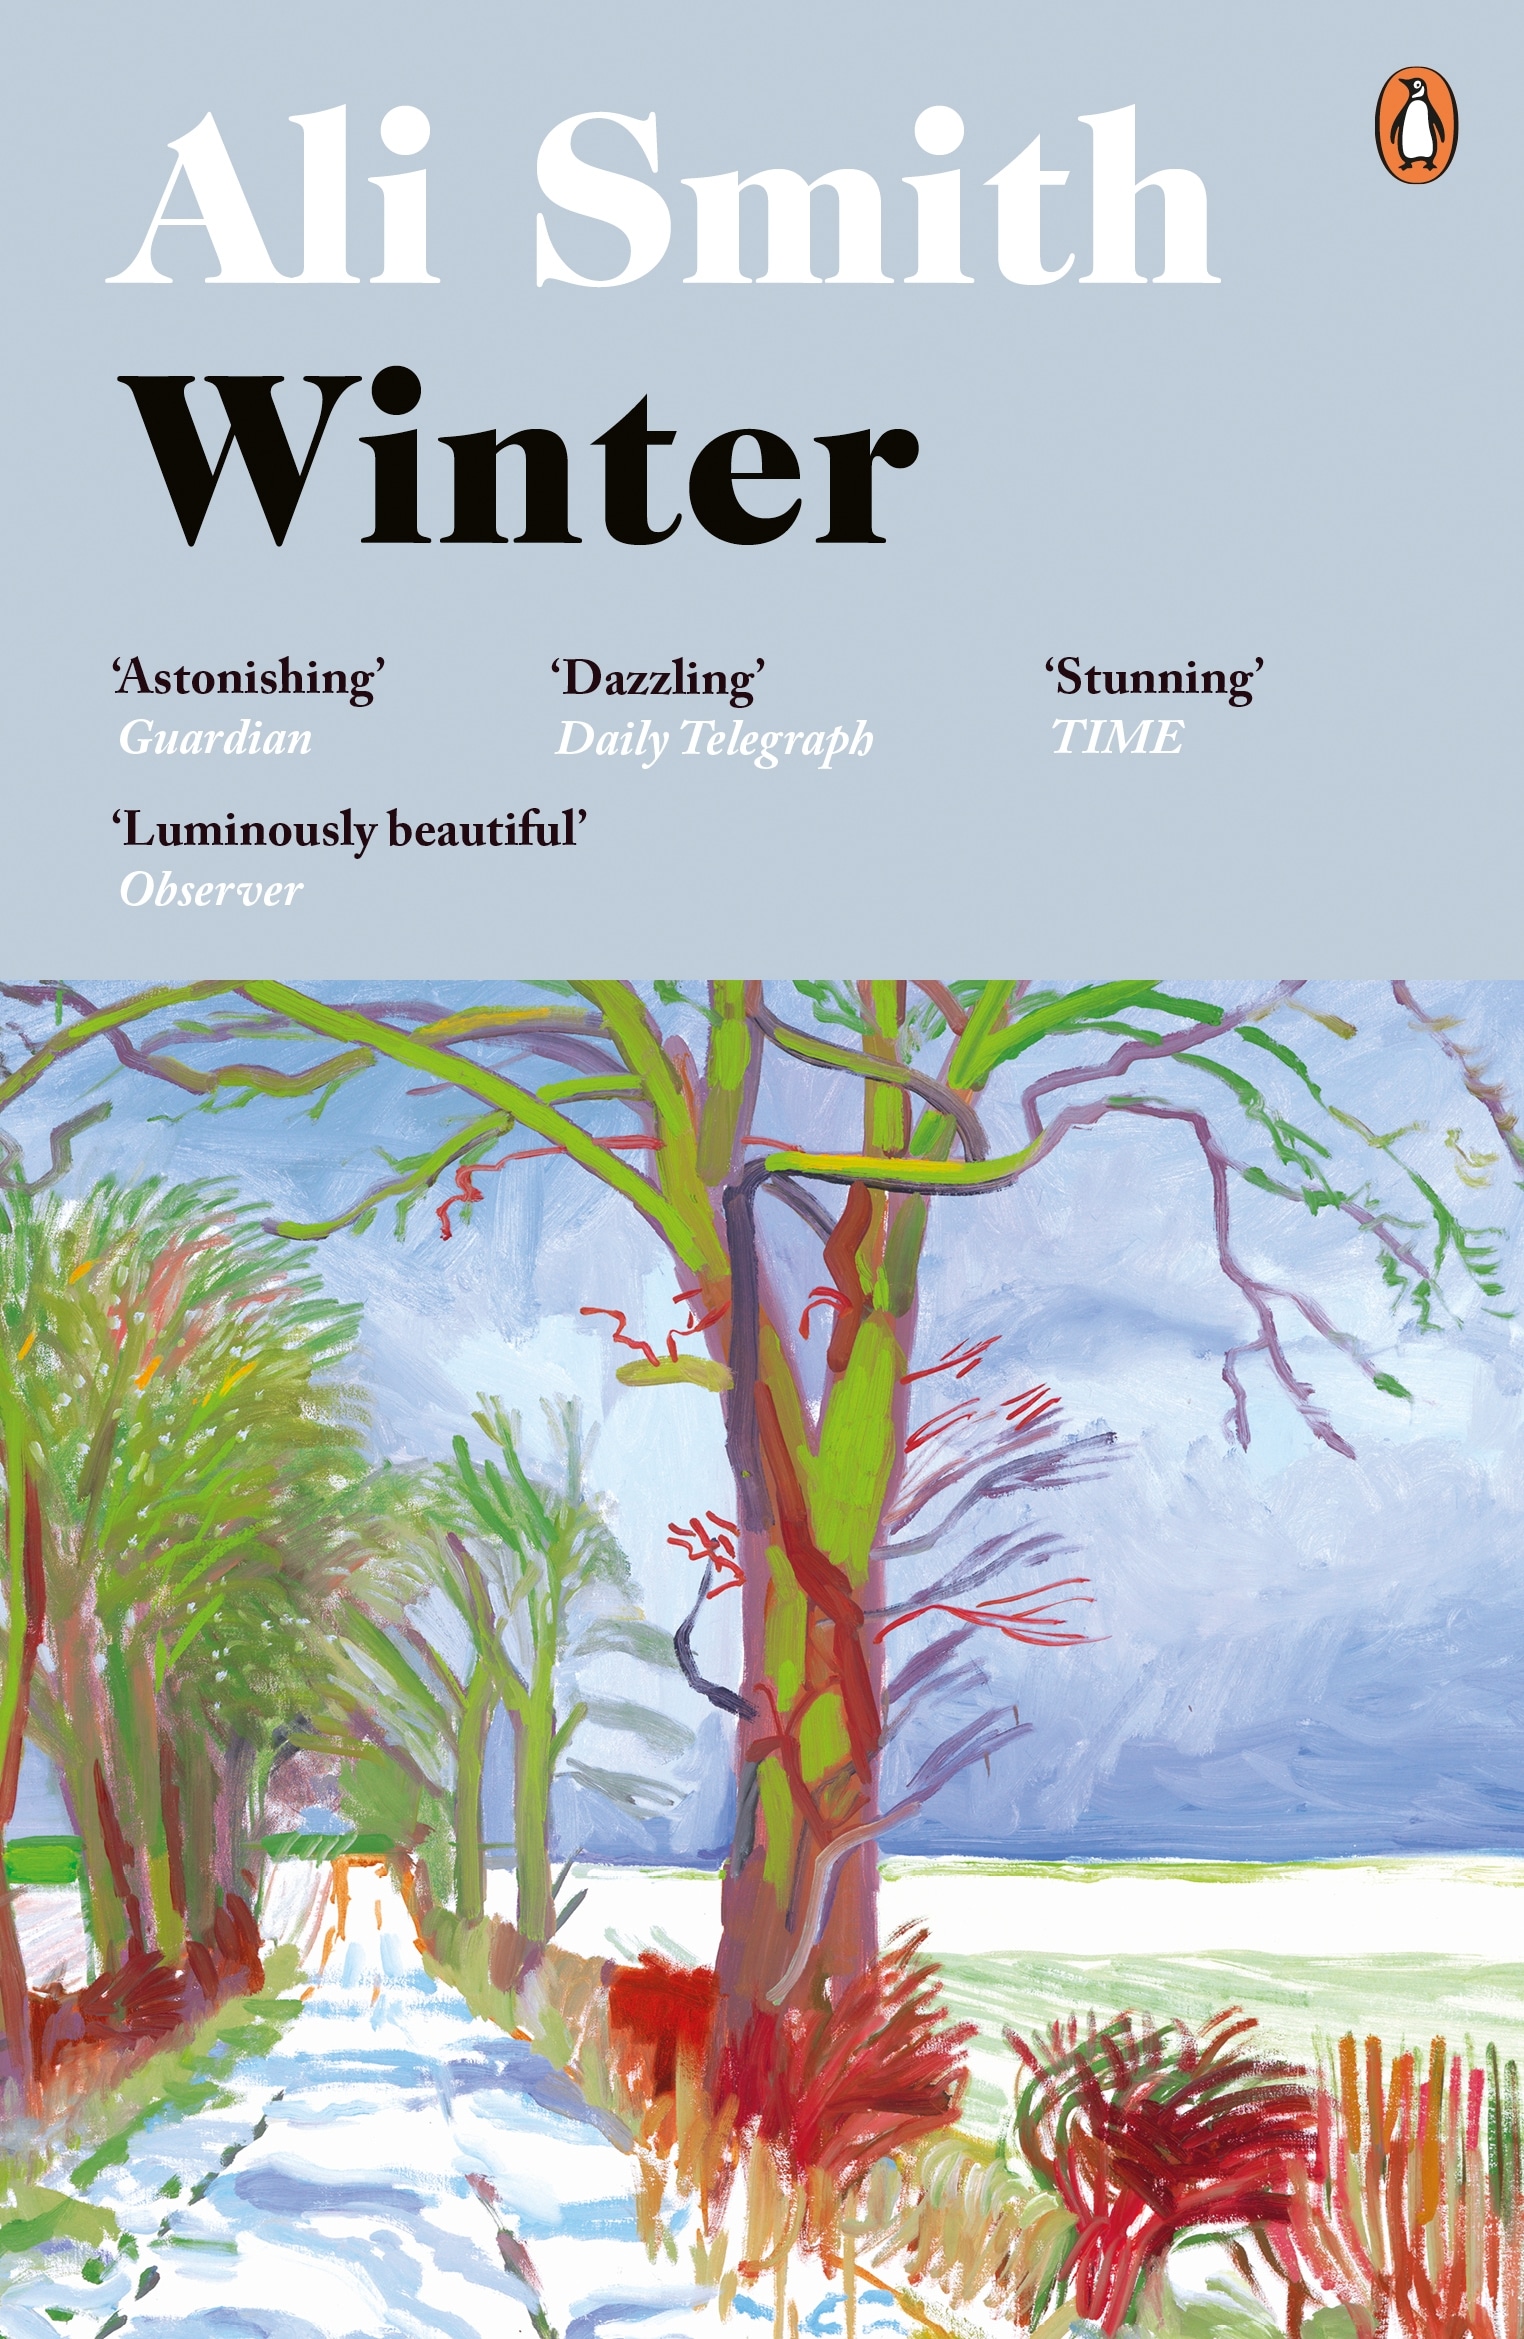 Book “Winter” by Ali Smith — October 4, 2018